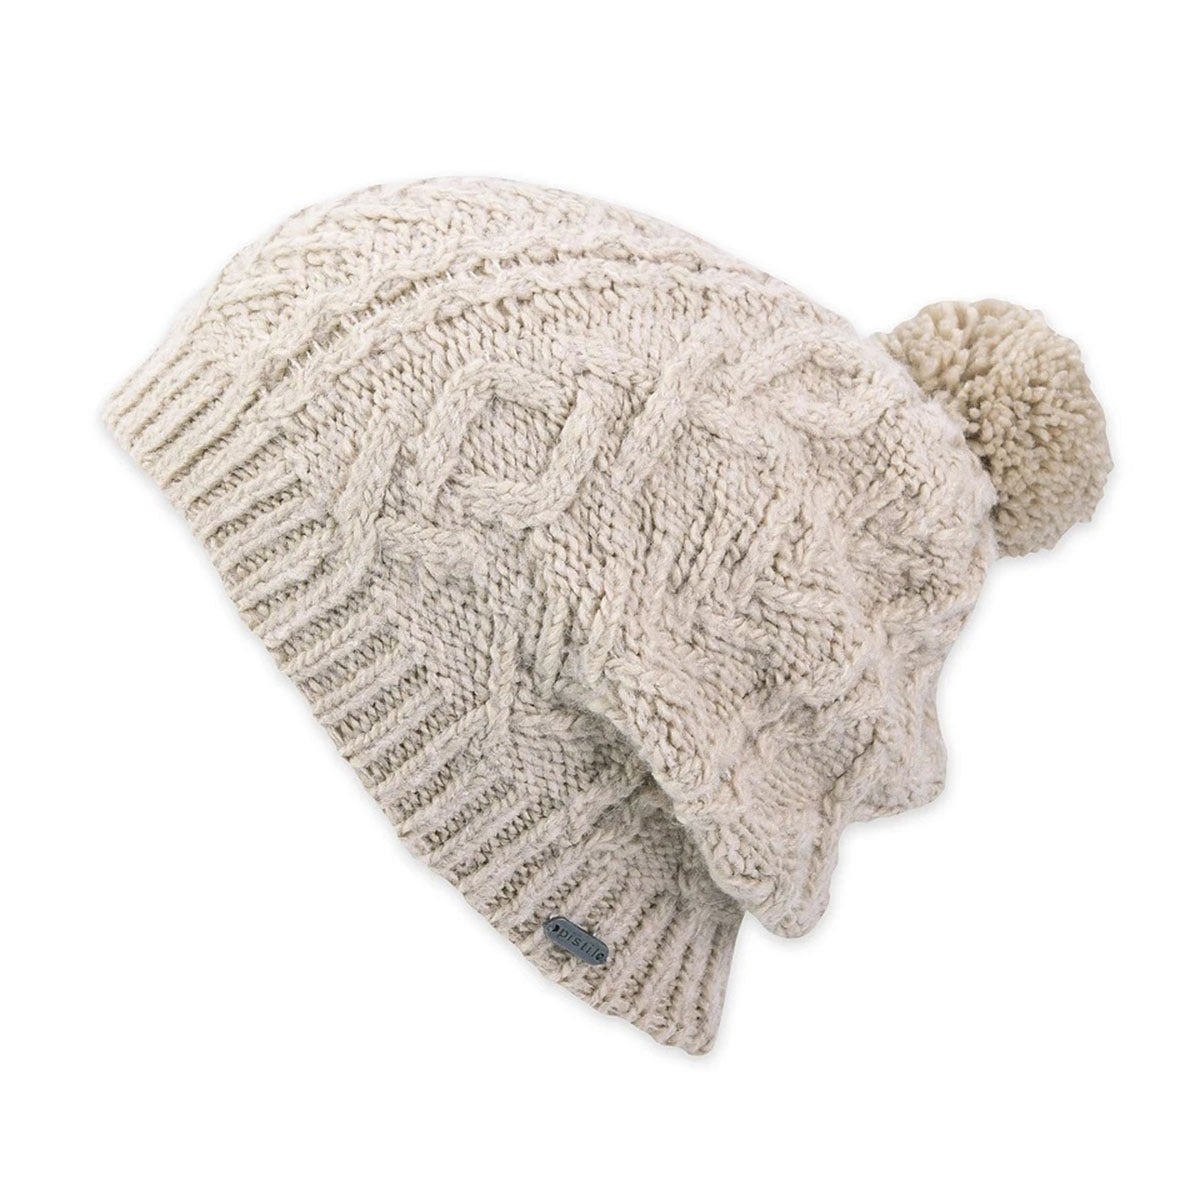 MIO SLOUCH HAT PLUM with a pom-pom on a white background by Pistil.